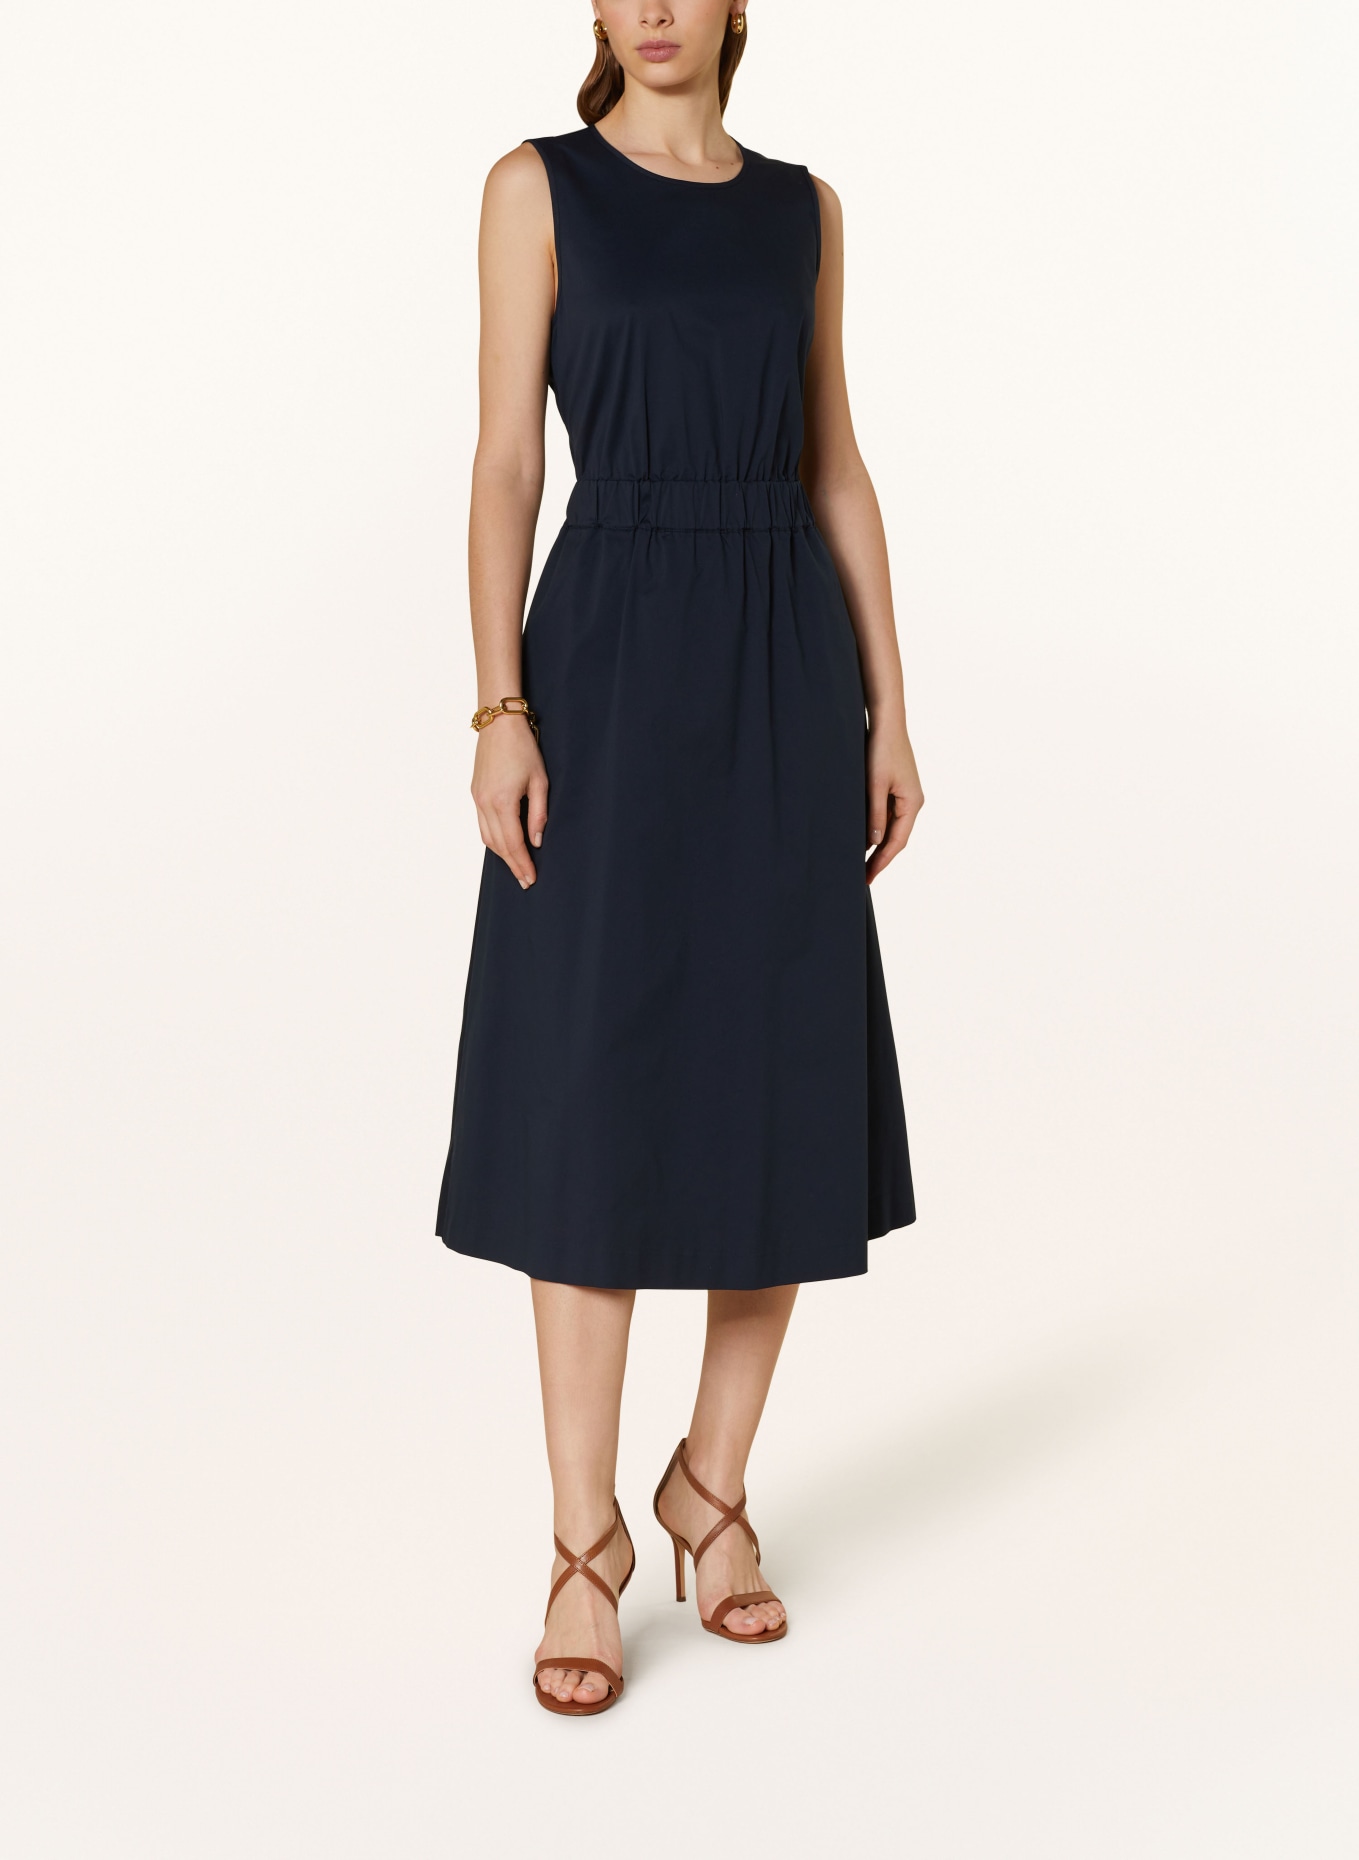 JOOP! Dress with cut-out, Color: DARK BLUE (Image 2)